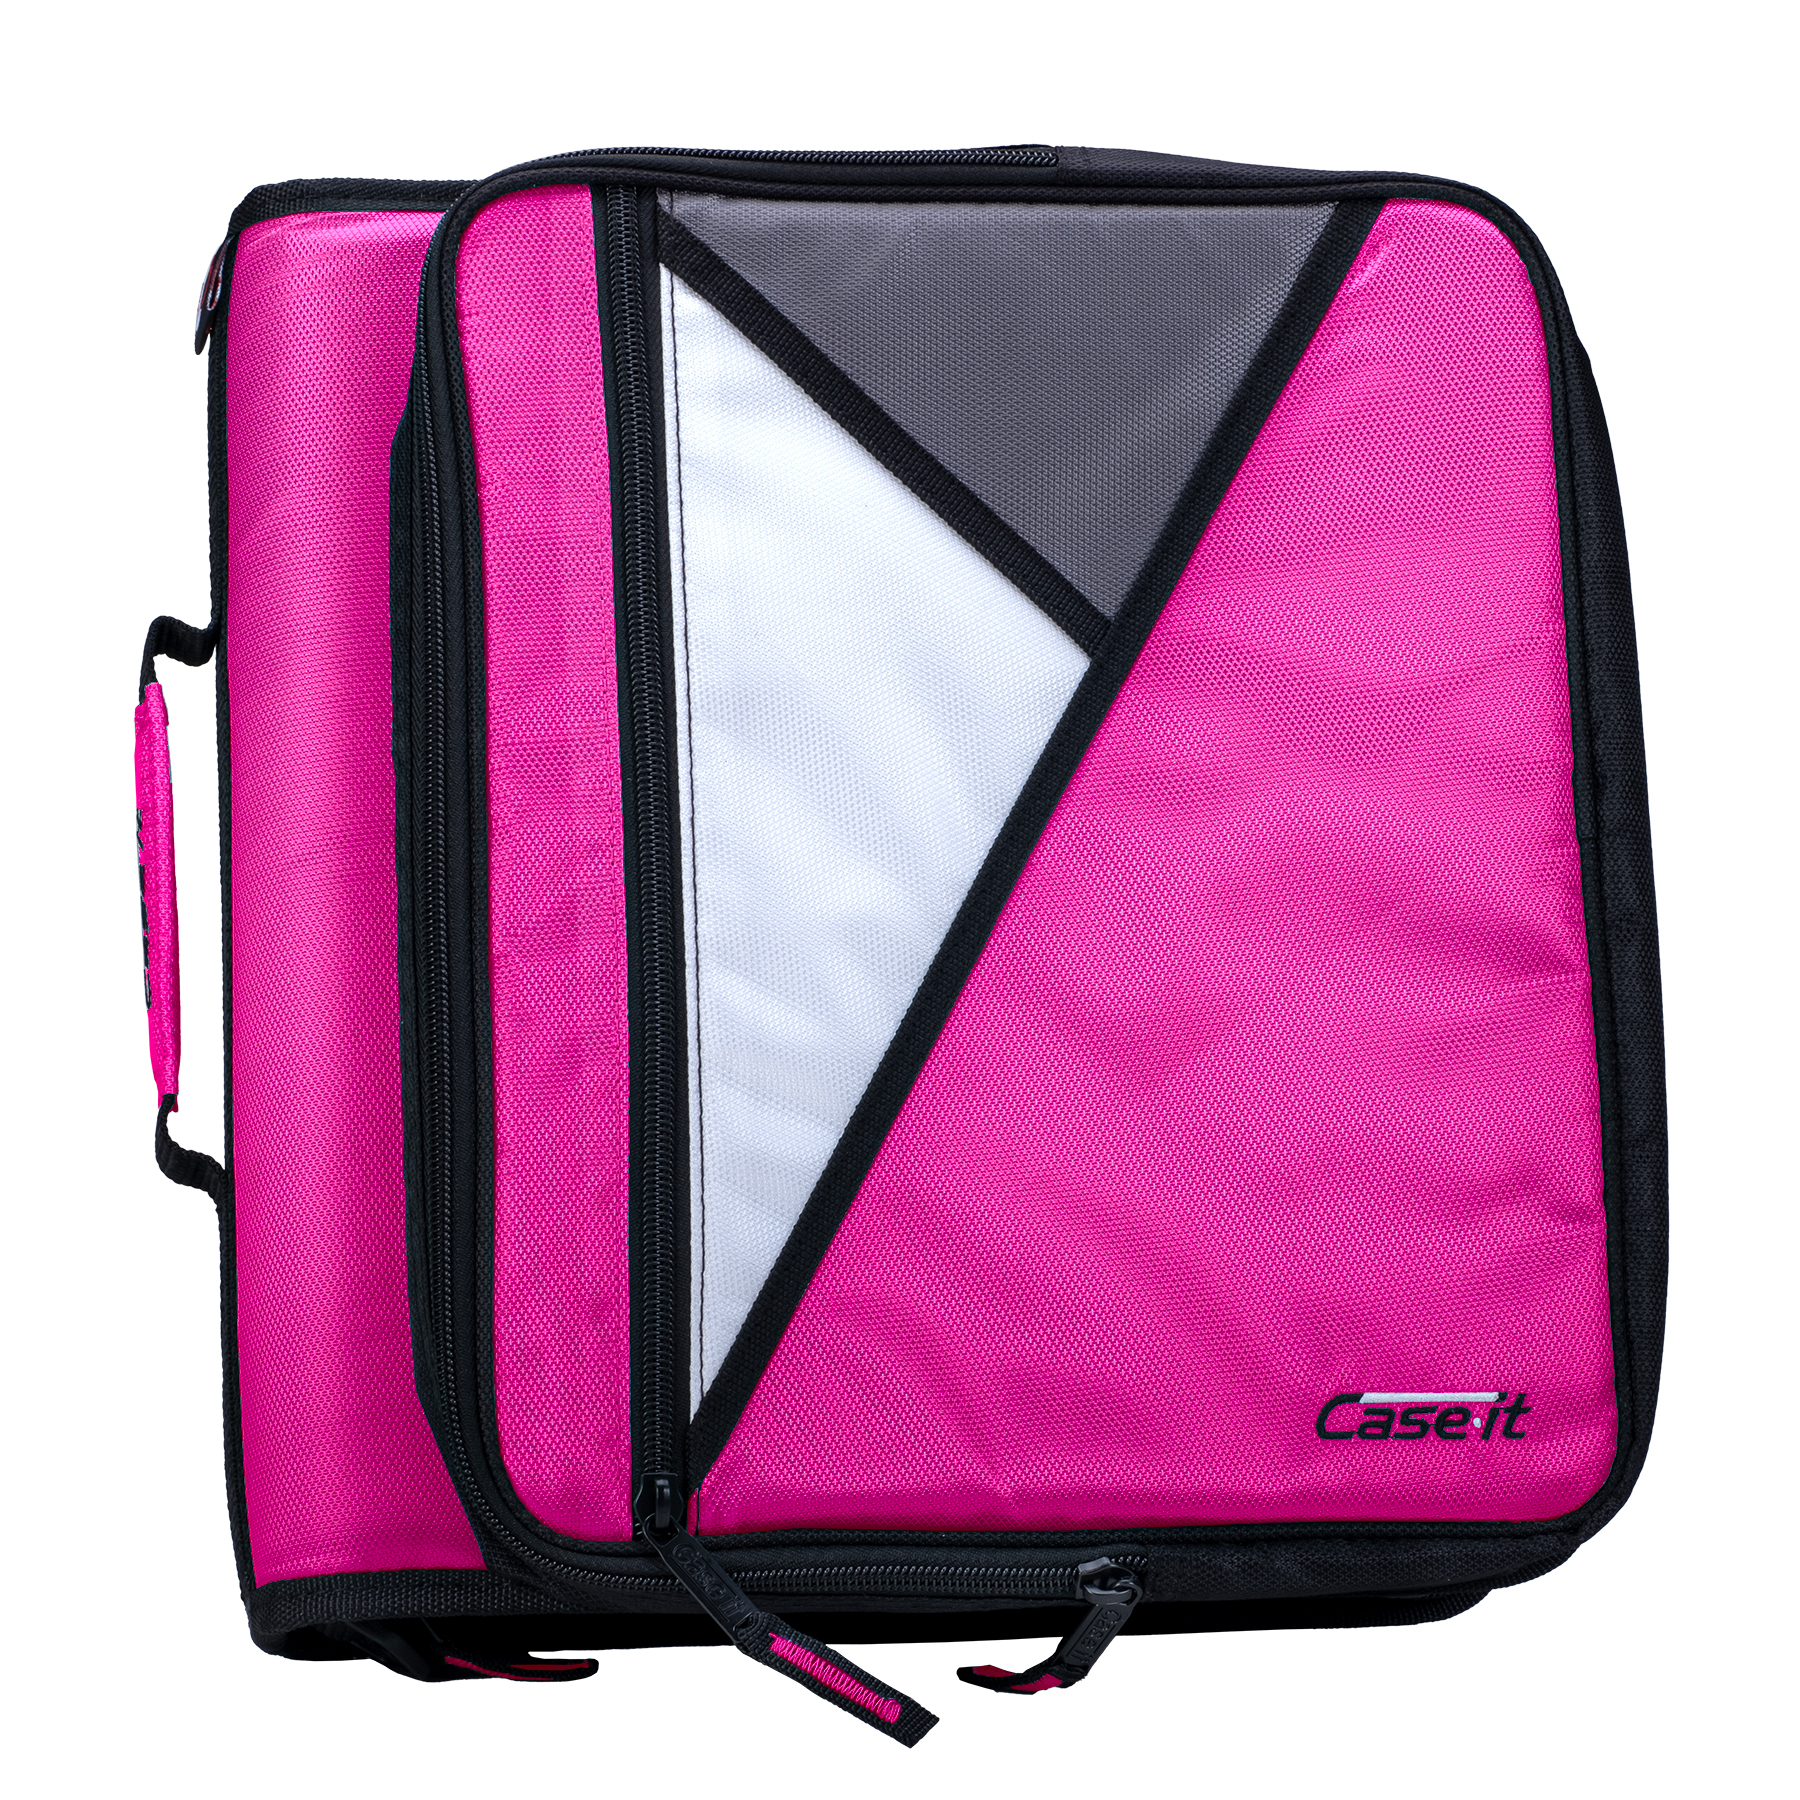 Case-It The Classic 2 Zipper Binder with Strap, Pink - Shop